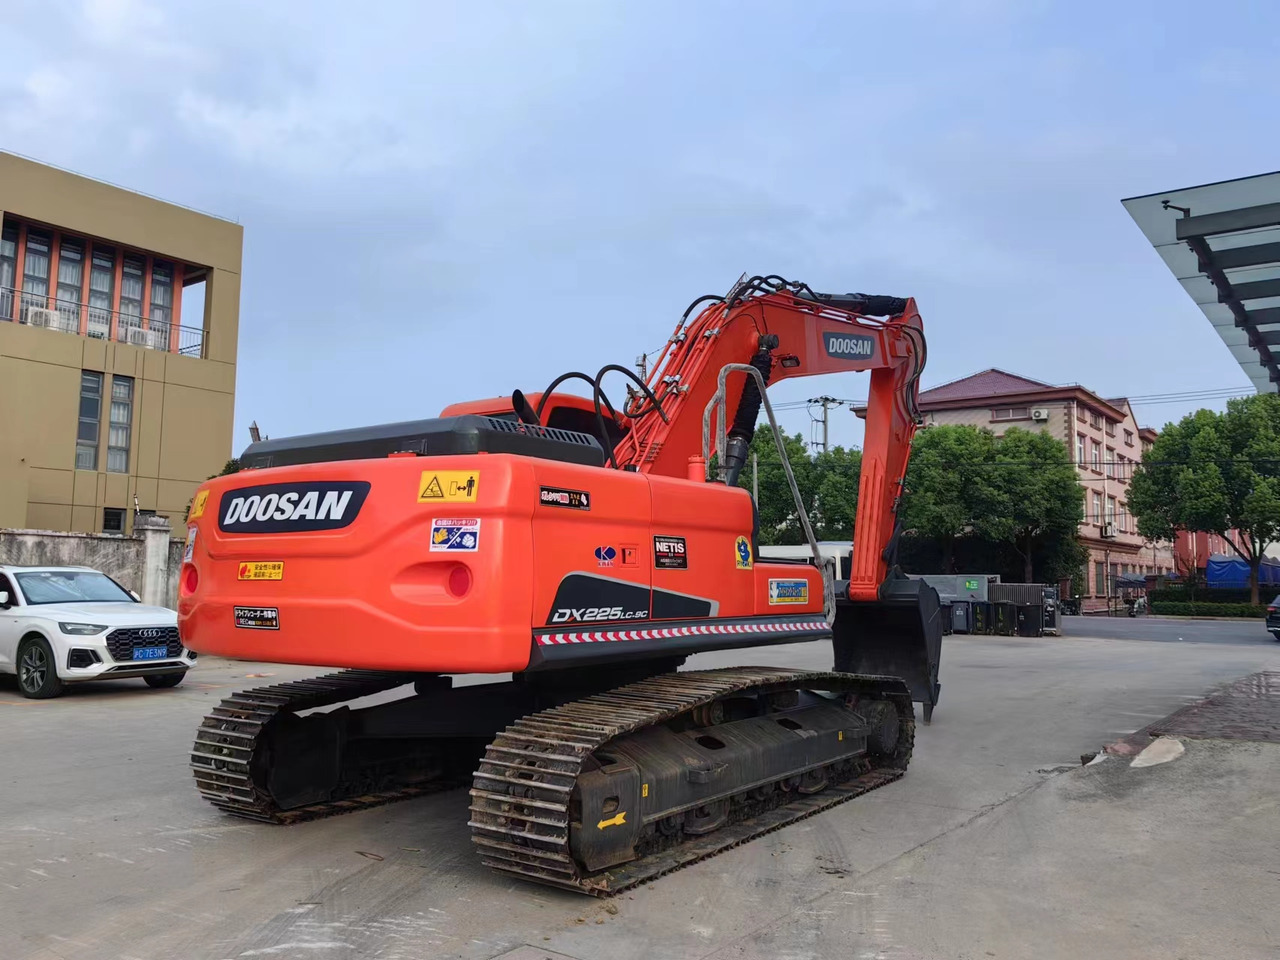 Rupsgraafmachine DOOSAN used excavator DX225LC-9 more videos and pictures of details and cab welcome to inquire: afbeelding 11